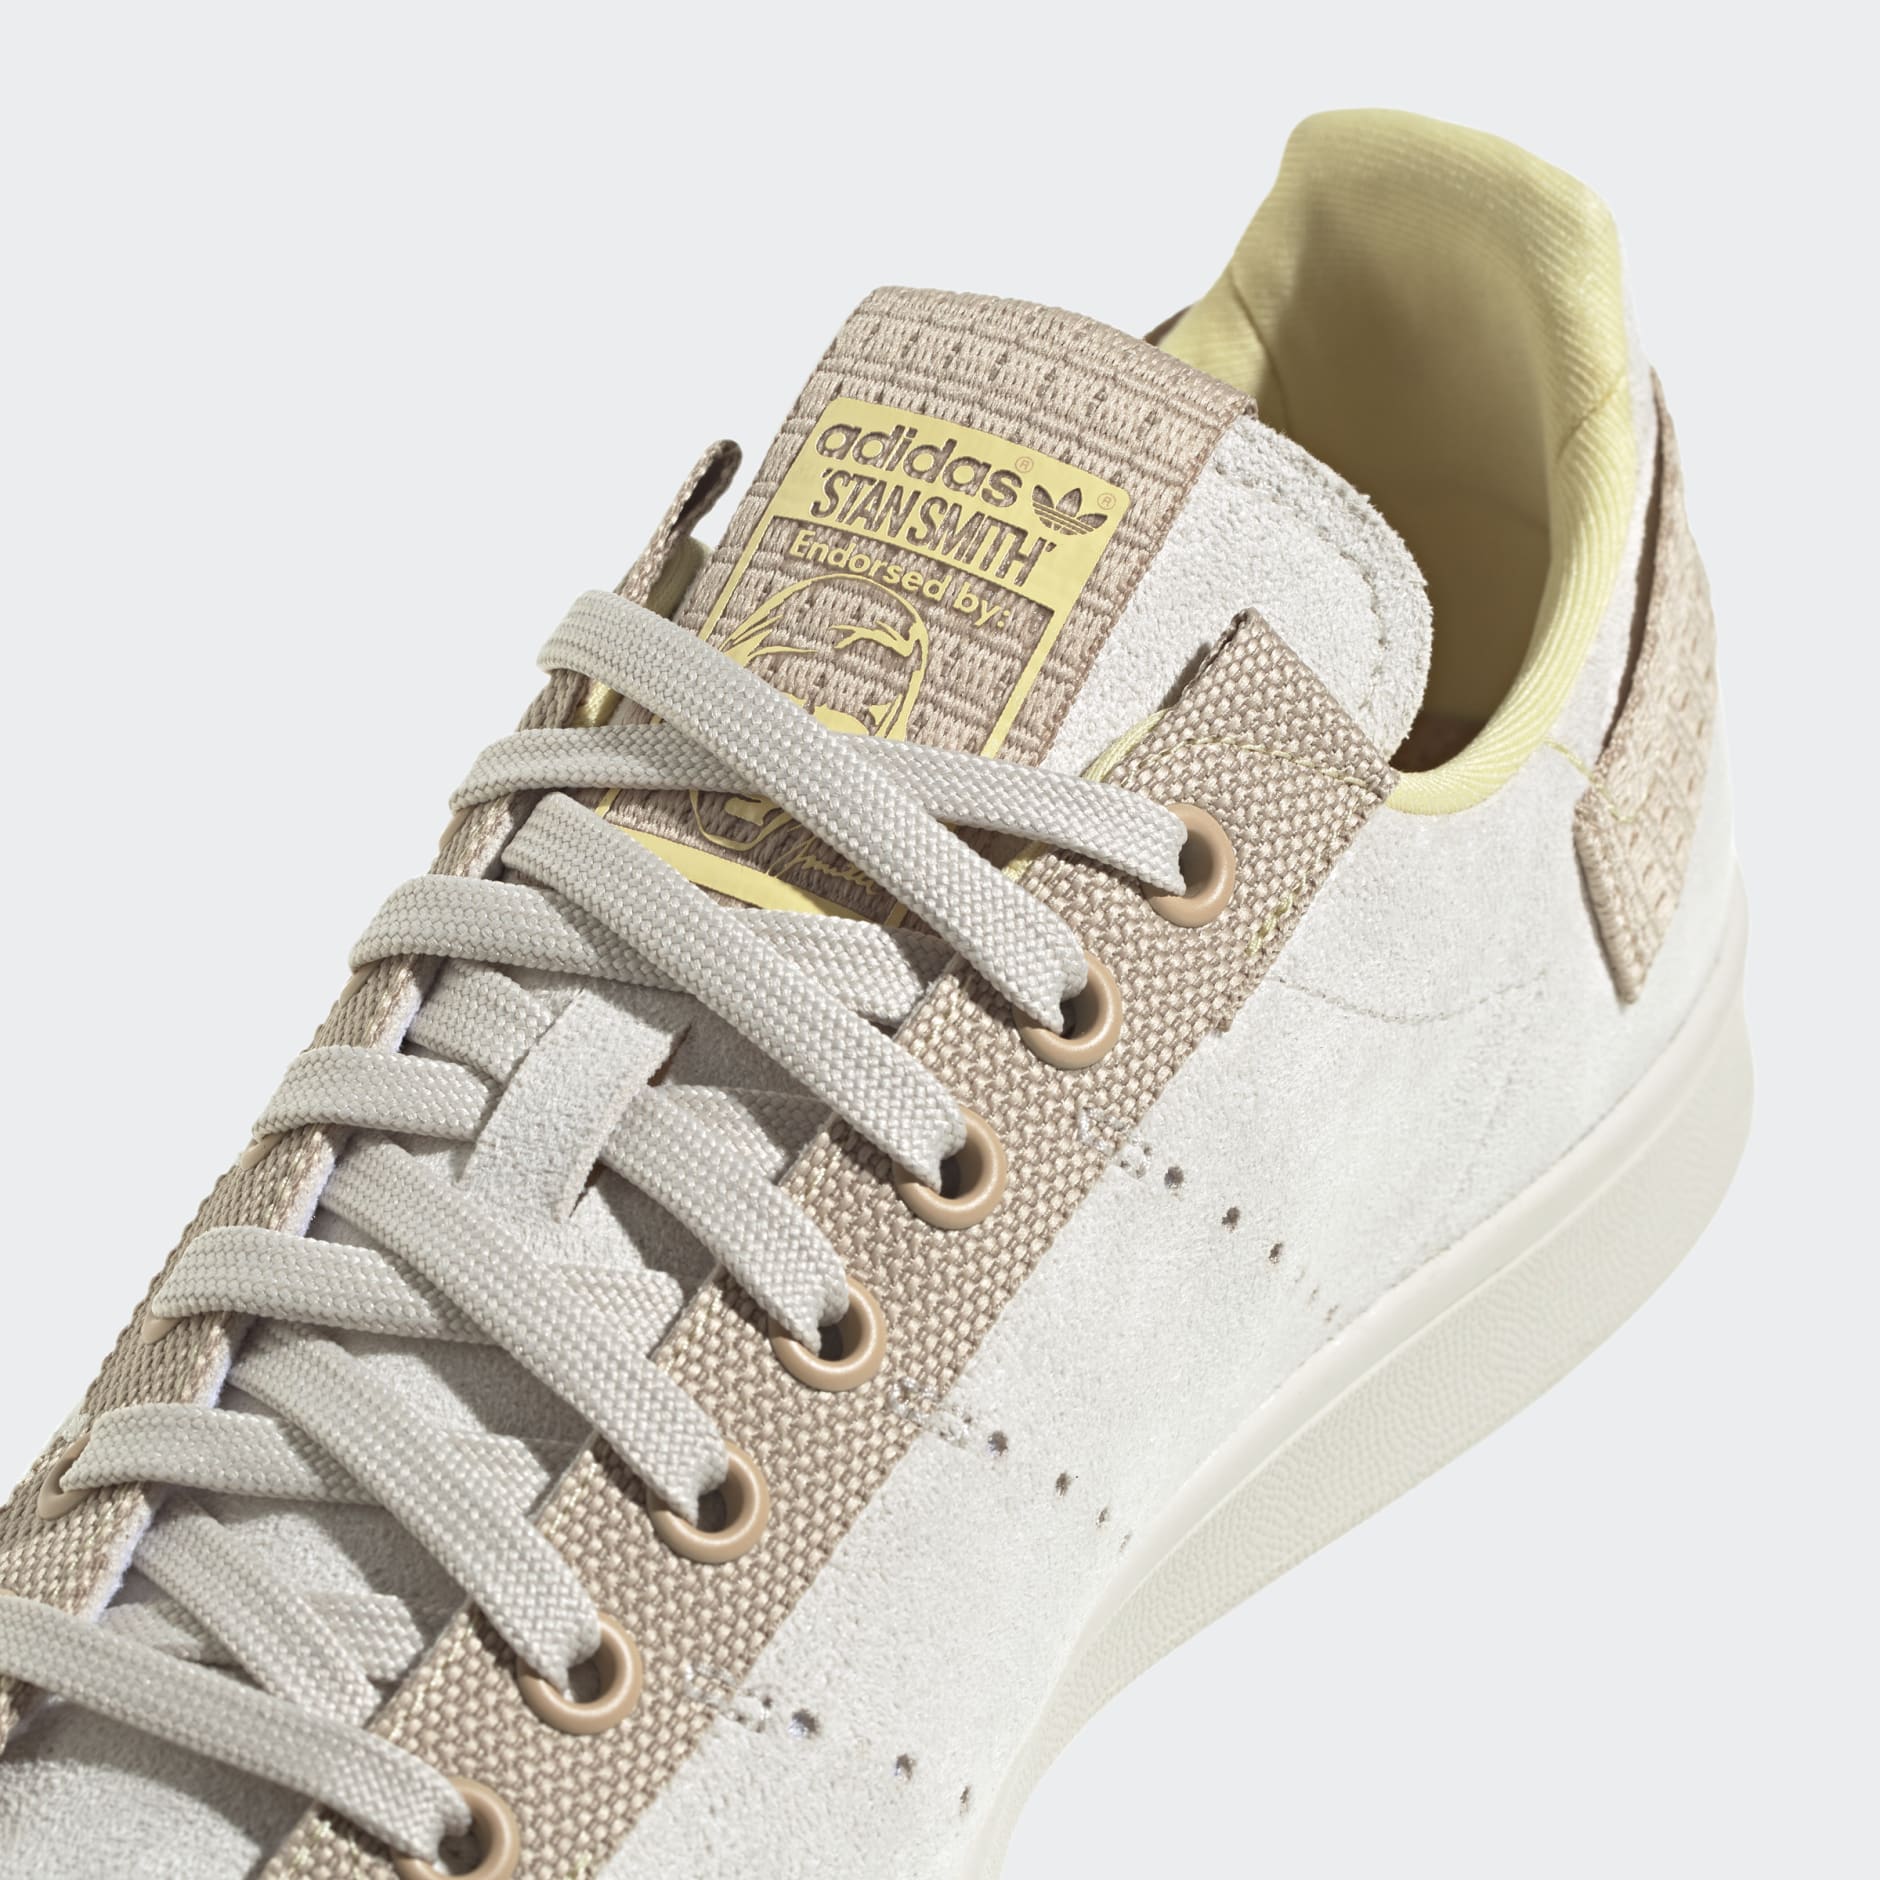 Shoes - Stan Smith Parley Shoes - Beige | adidas South Africa